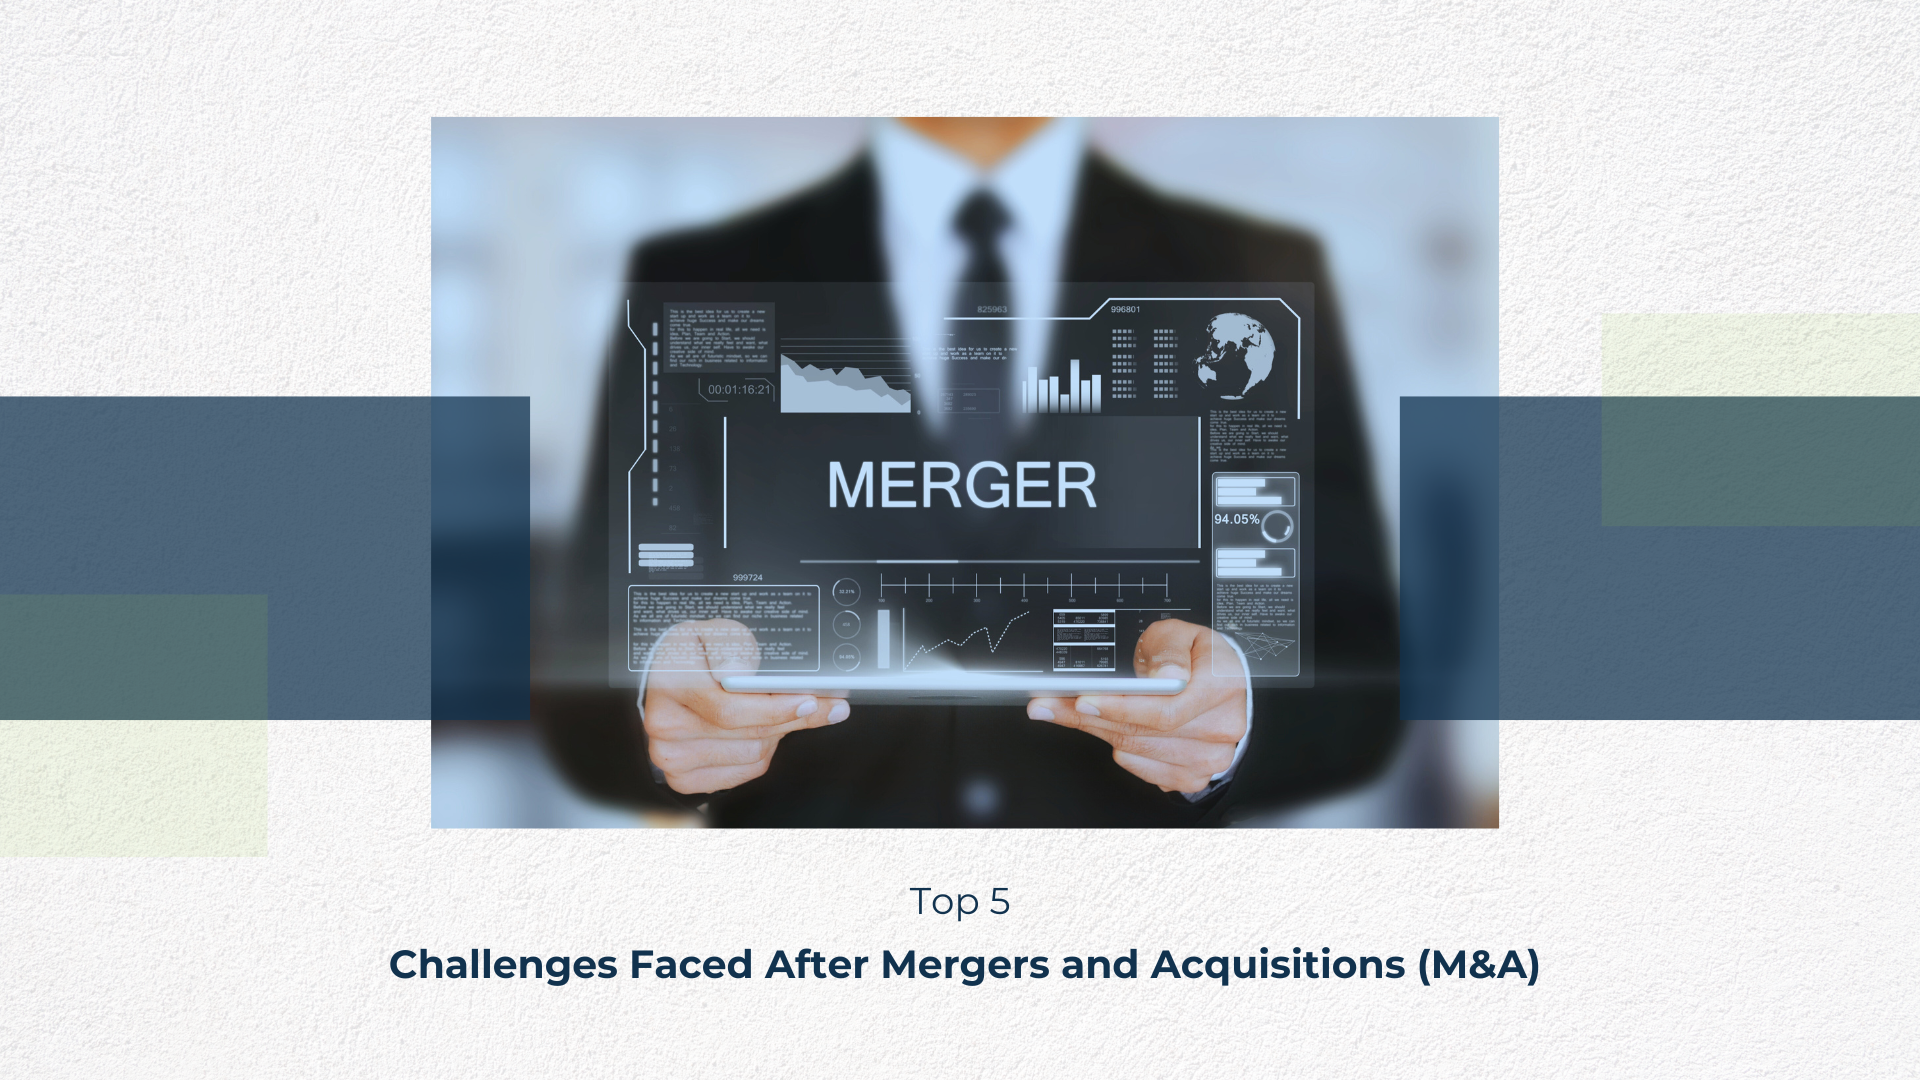 top 5 challenges after M&A